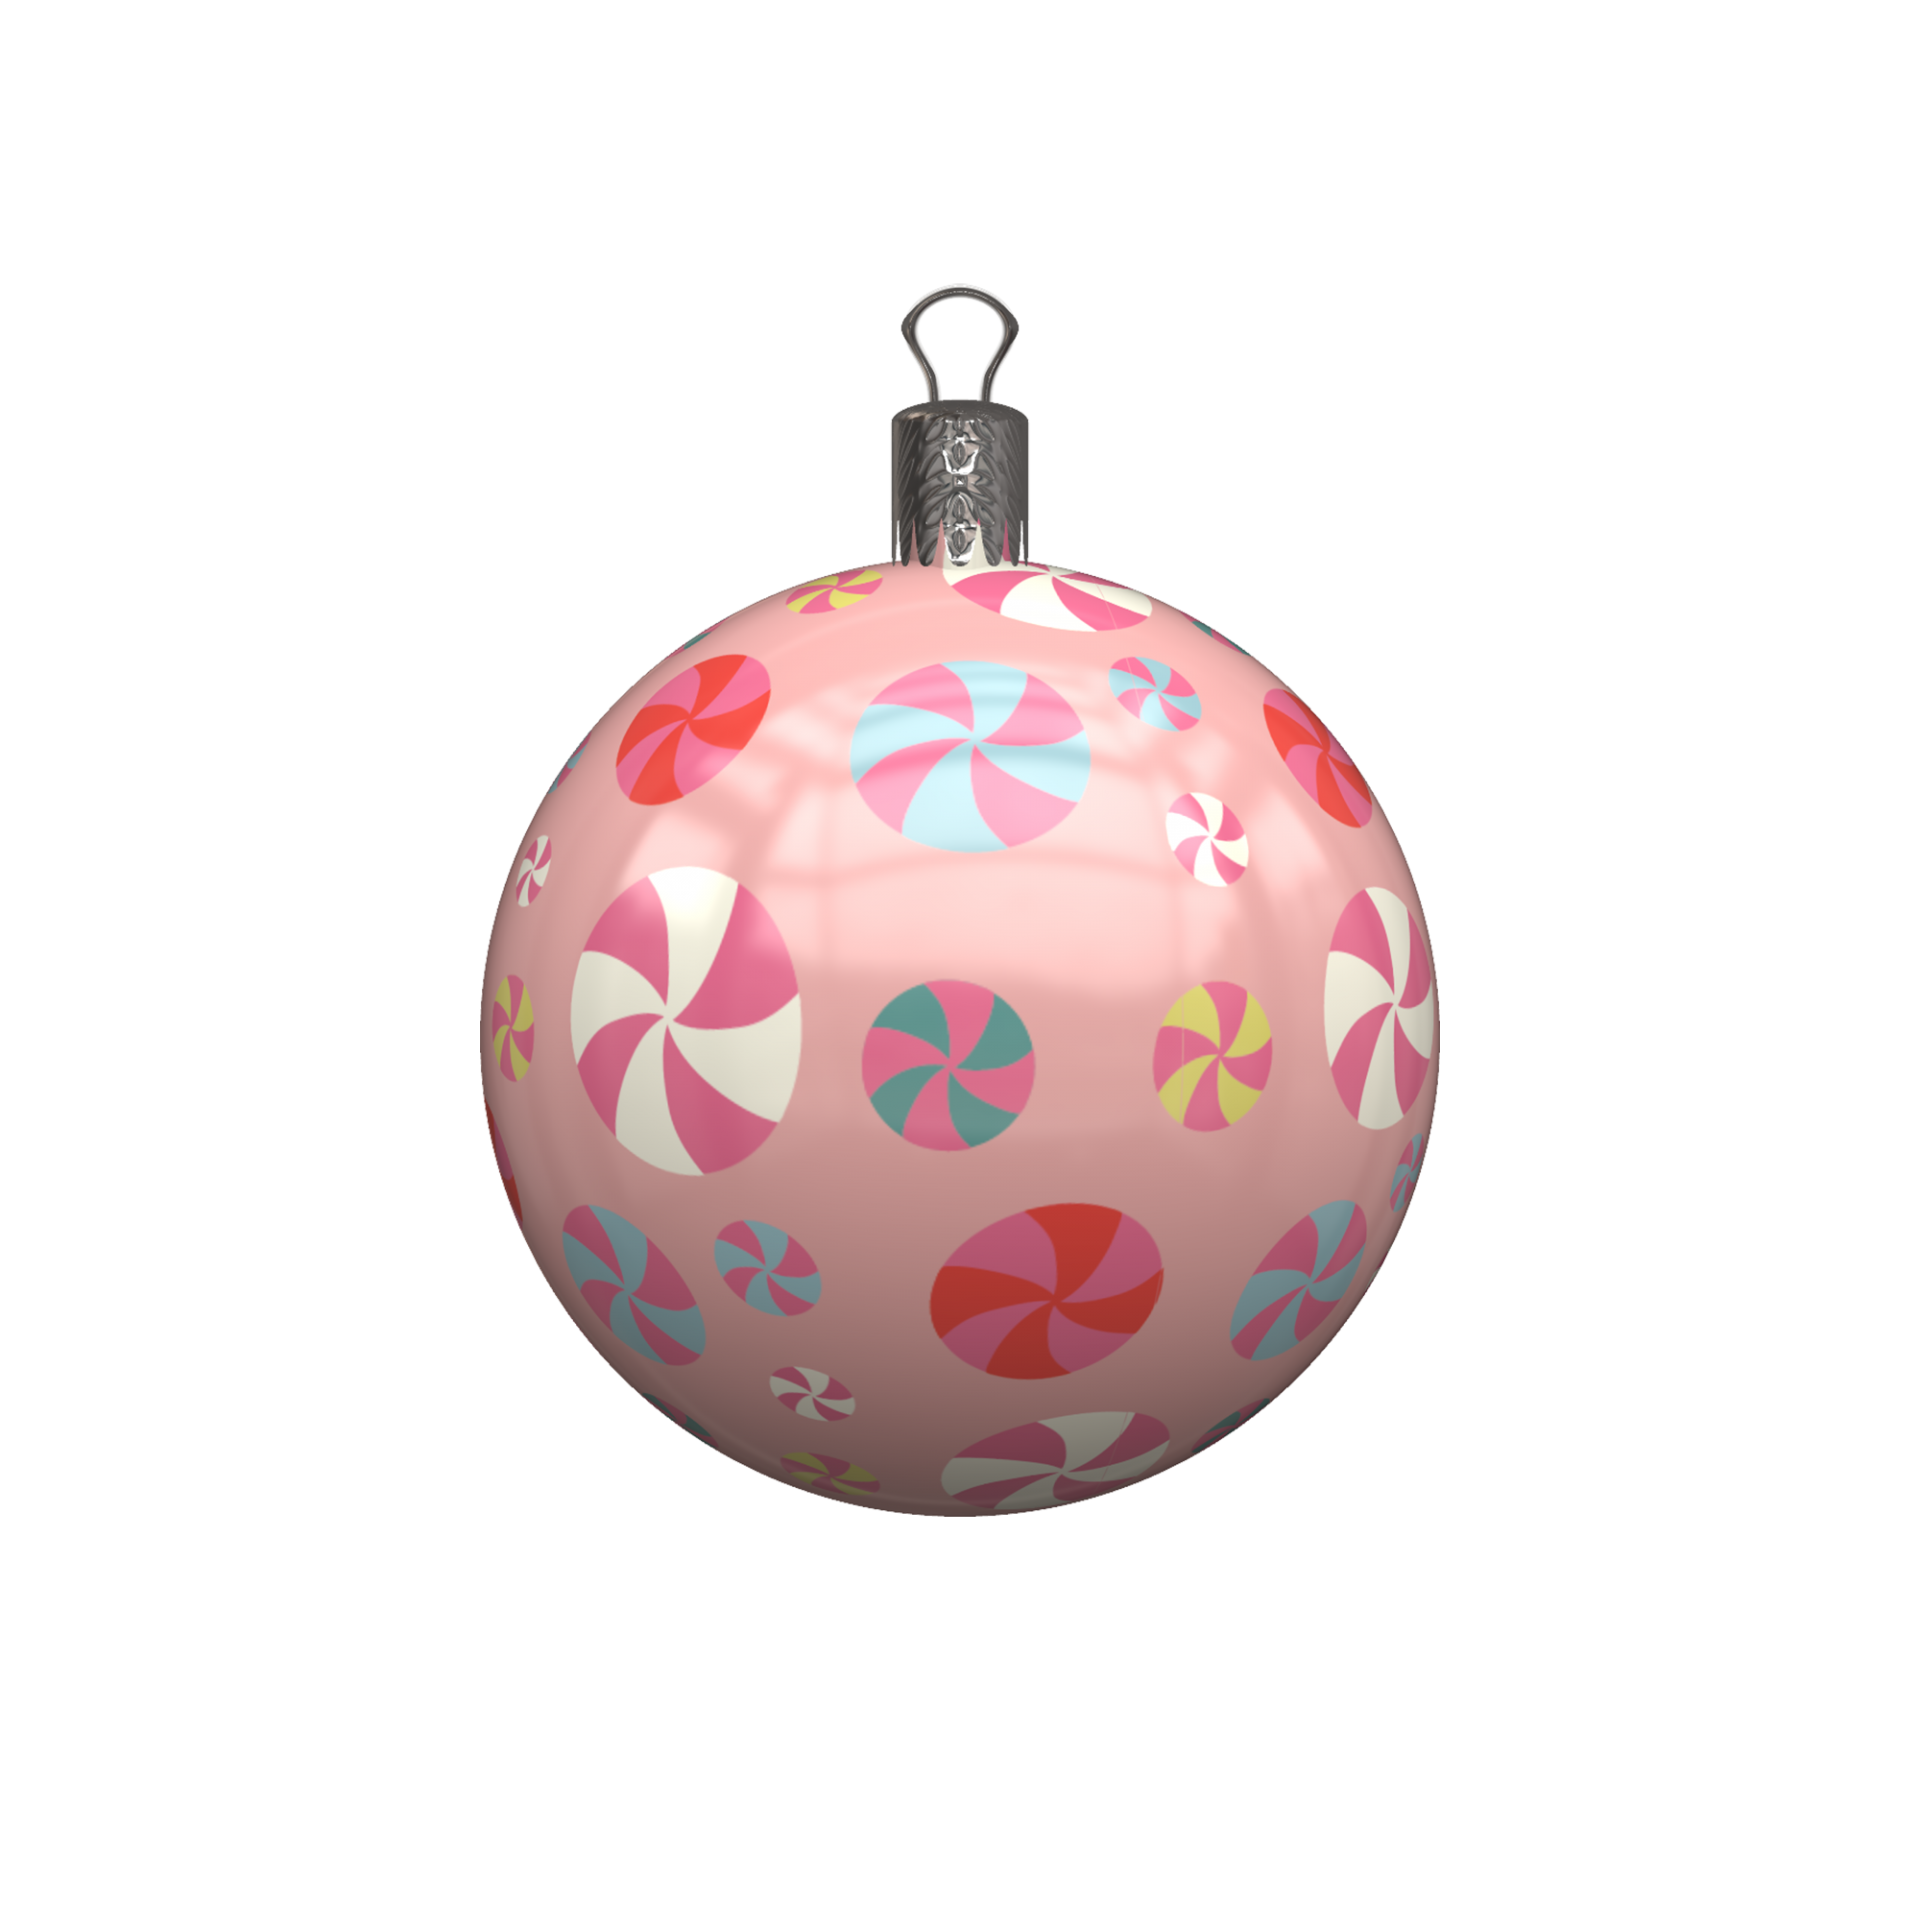 Pink Christmas Ornaments PNG Transparent Image